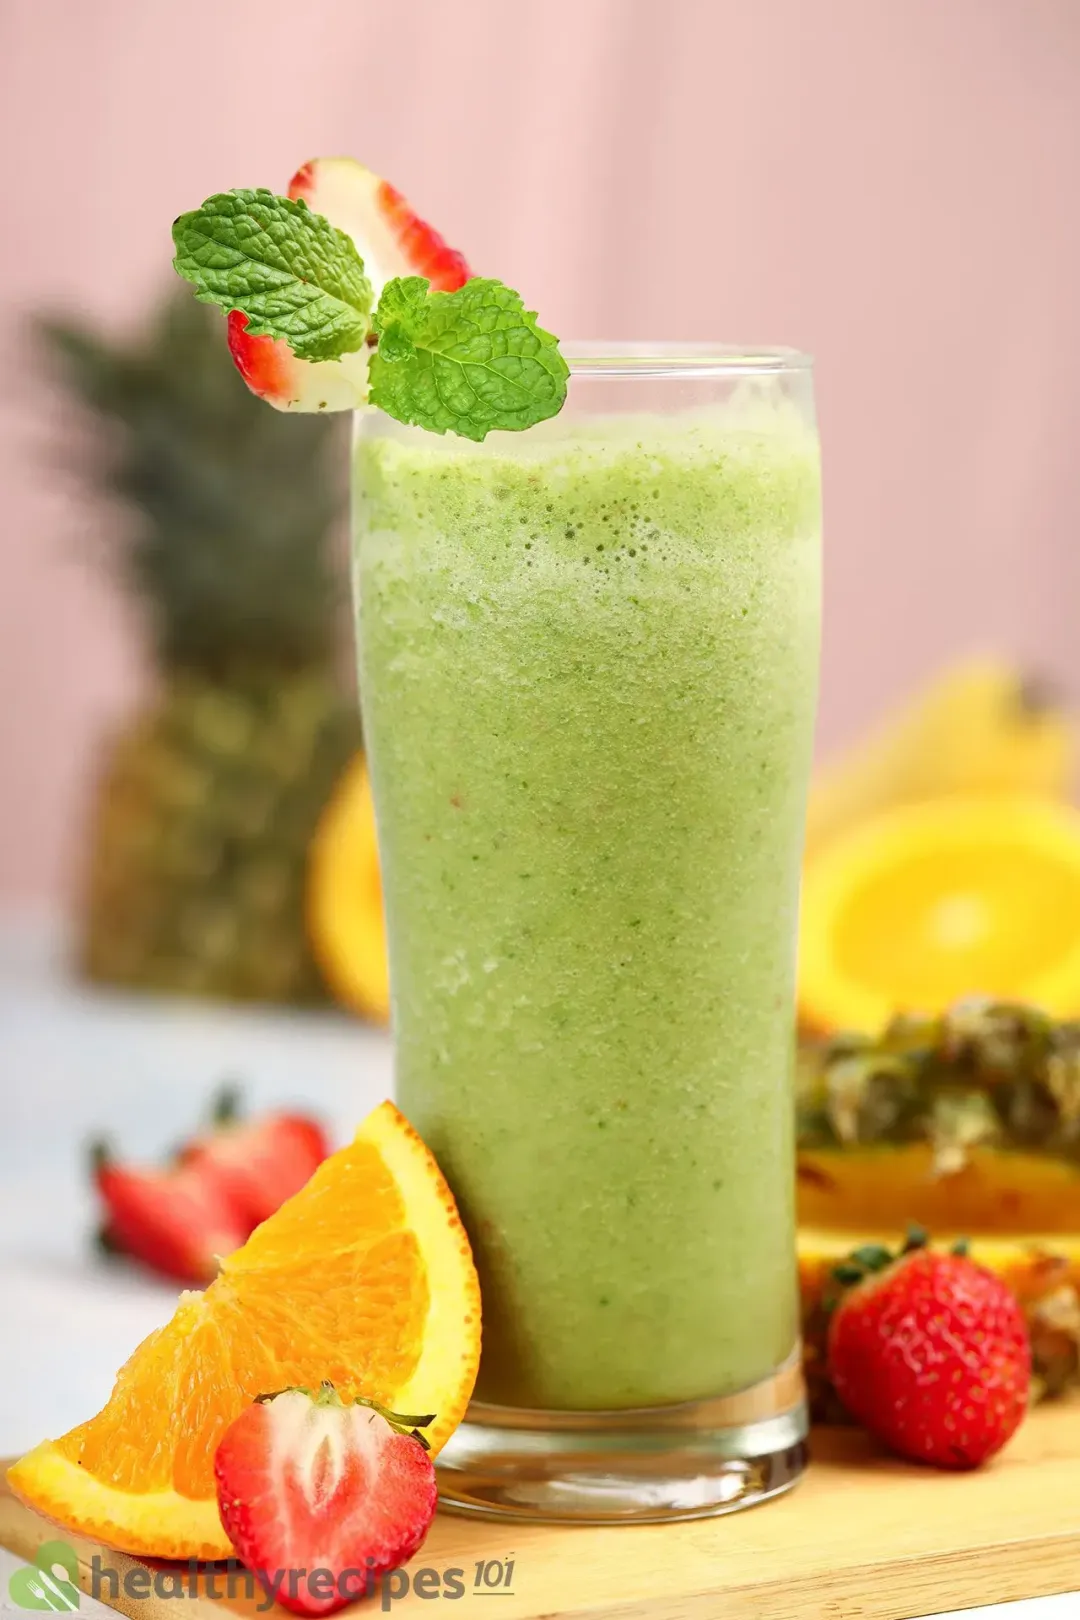 Is This Spinach Fruit Smoothie Recipe Healthy